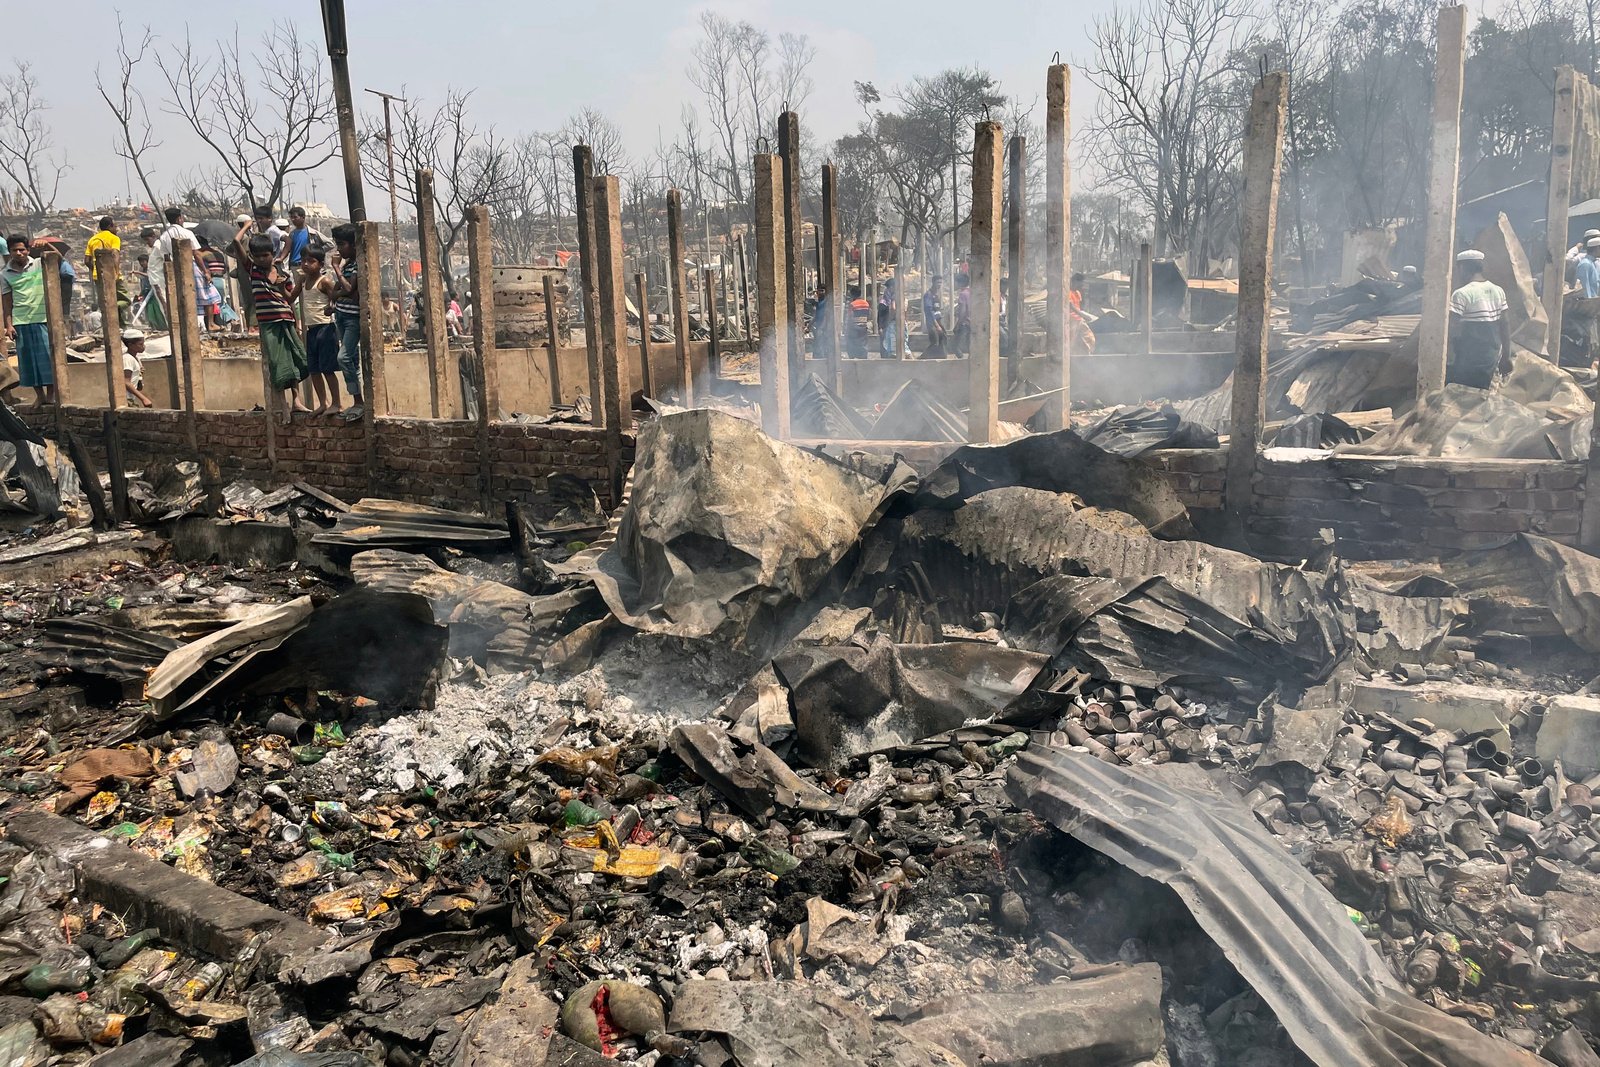 Bangladesh. Fire destroys shelters in Rohingya refugee settlement in Cox's Bazar